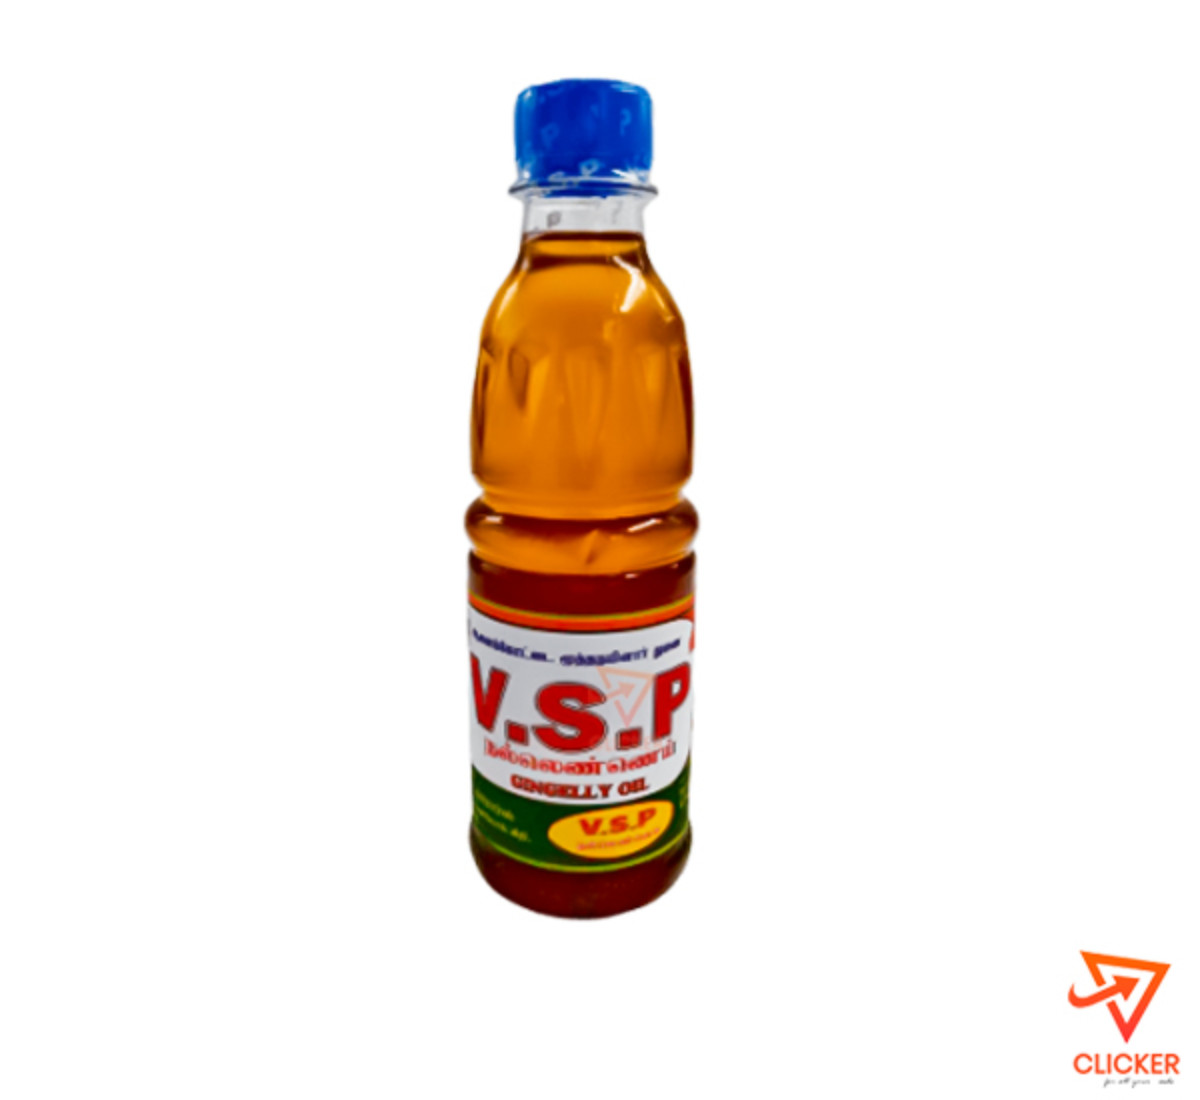 Clicker product 200ml VSP gingelly oil 1125